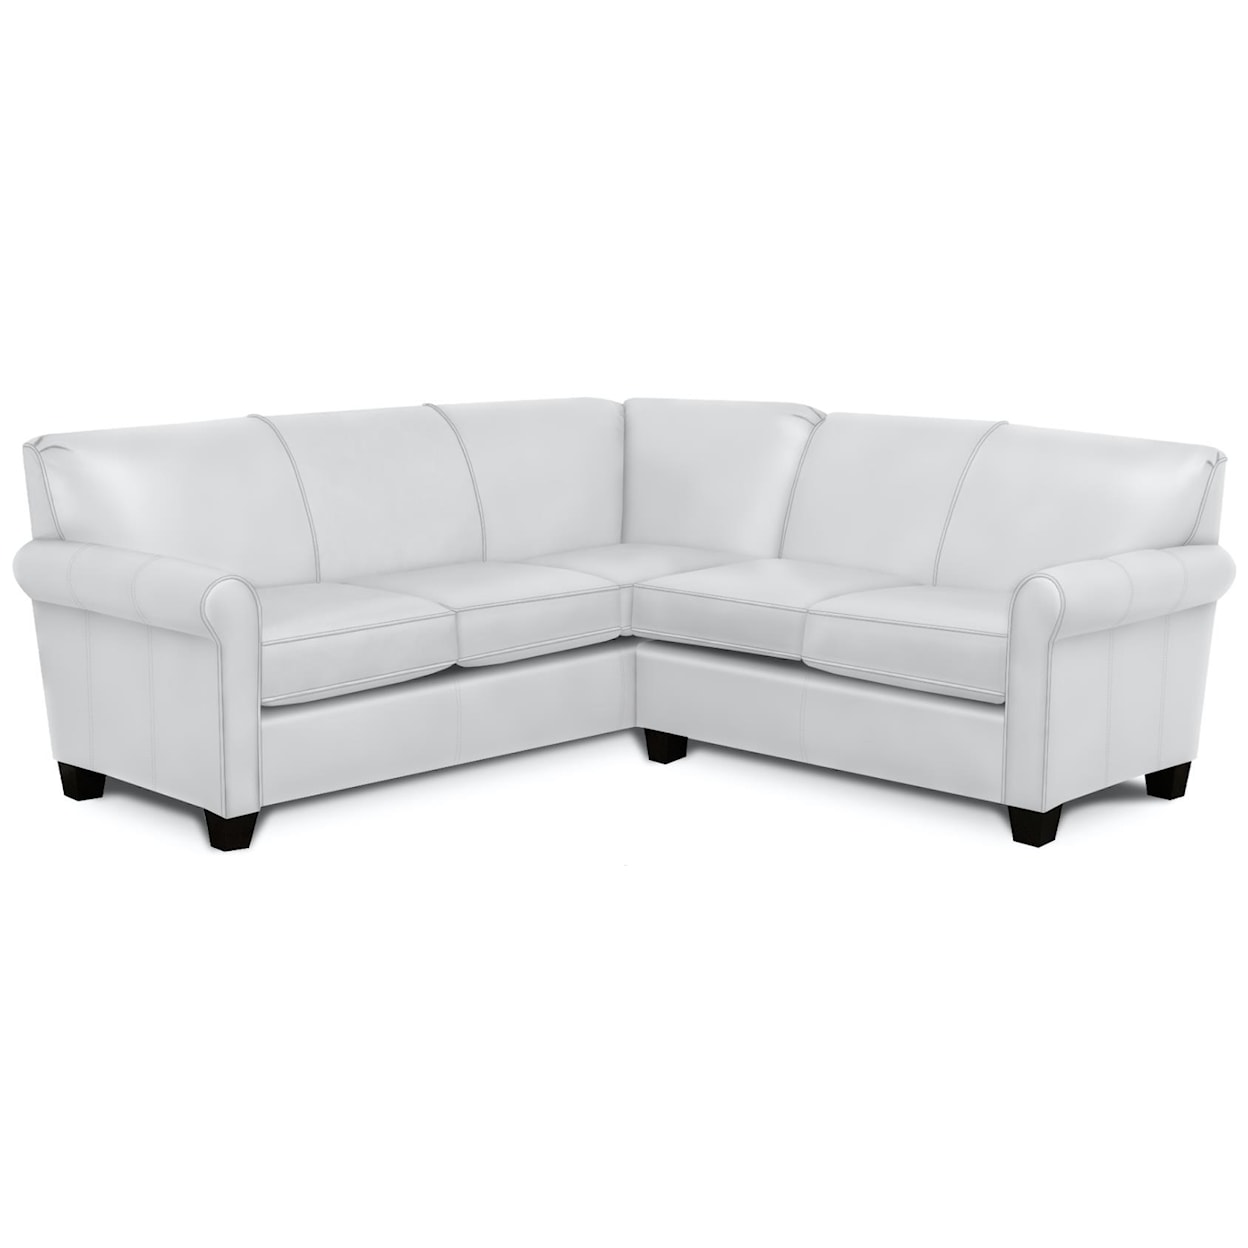 England Angie 2 PC Sectional